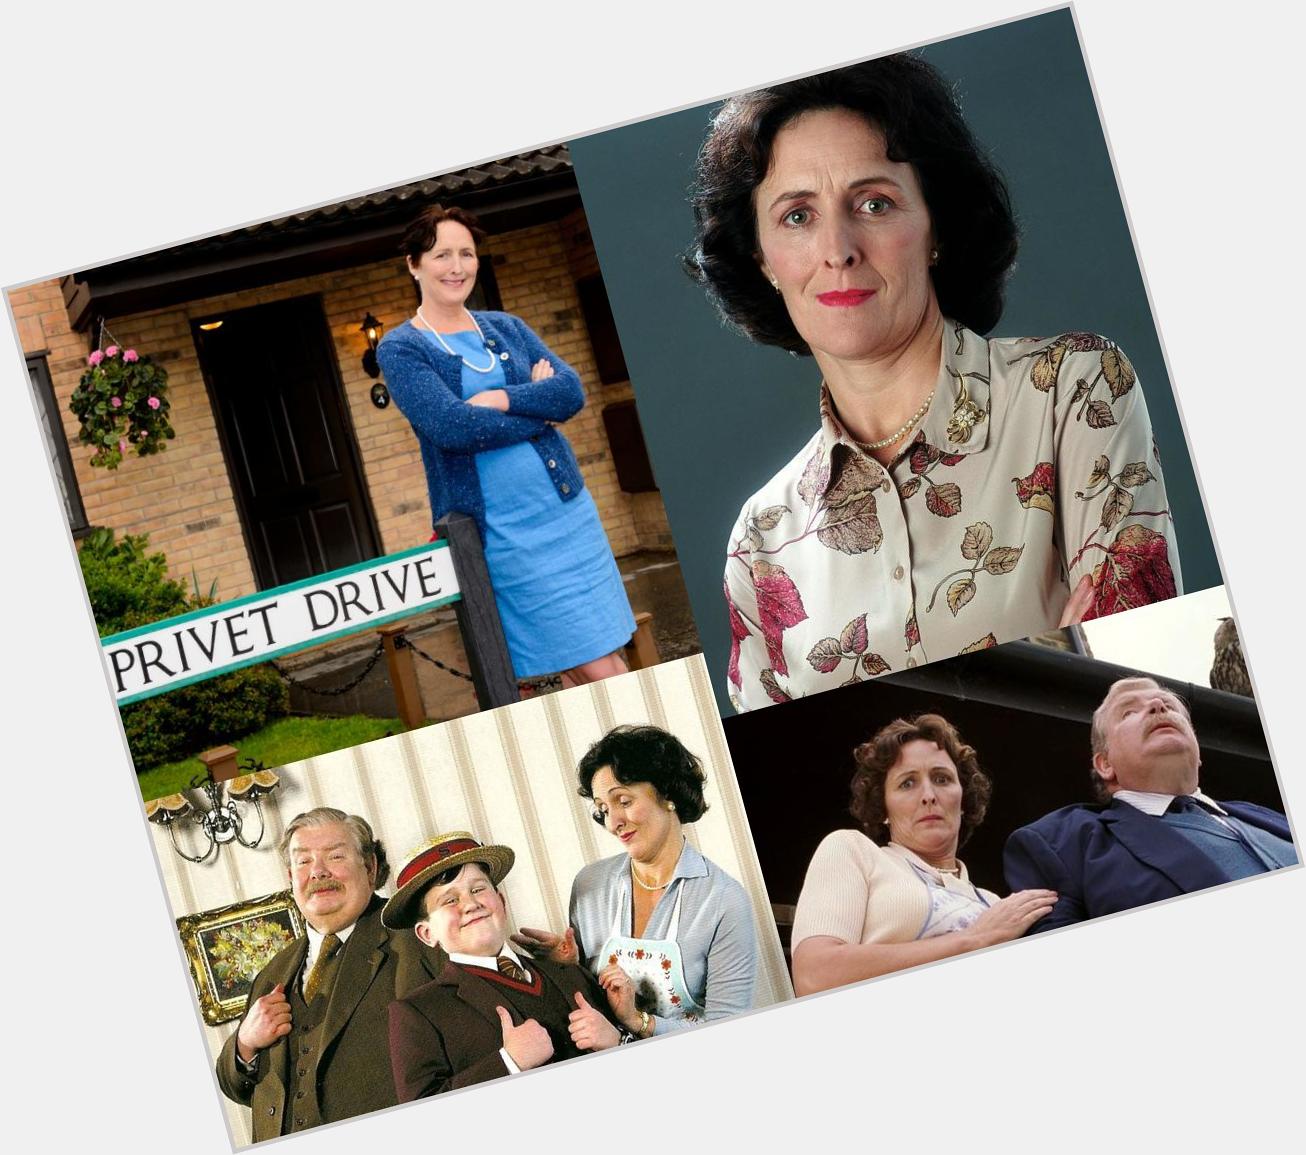 Happy Birthday to Fiona Shaw! She played Petunia Dursley in the Harry Potter Films. 